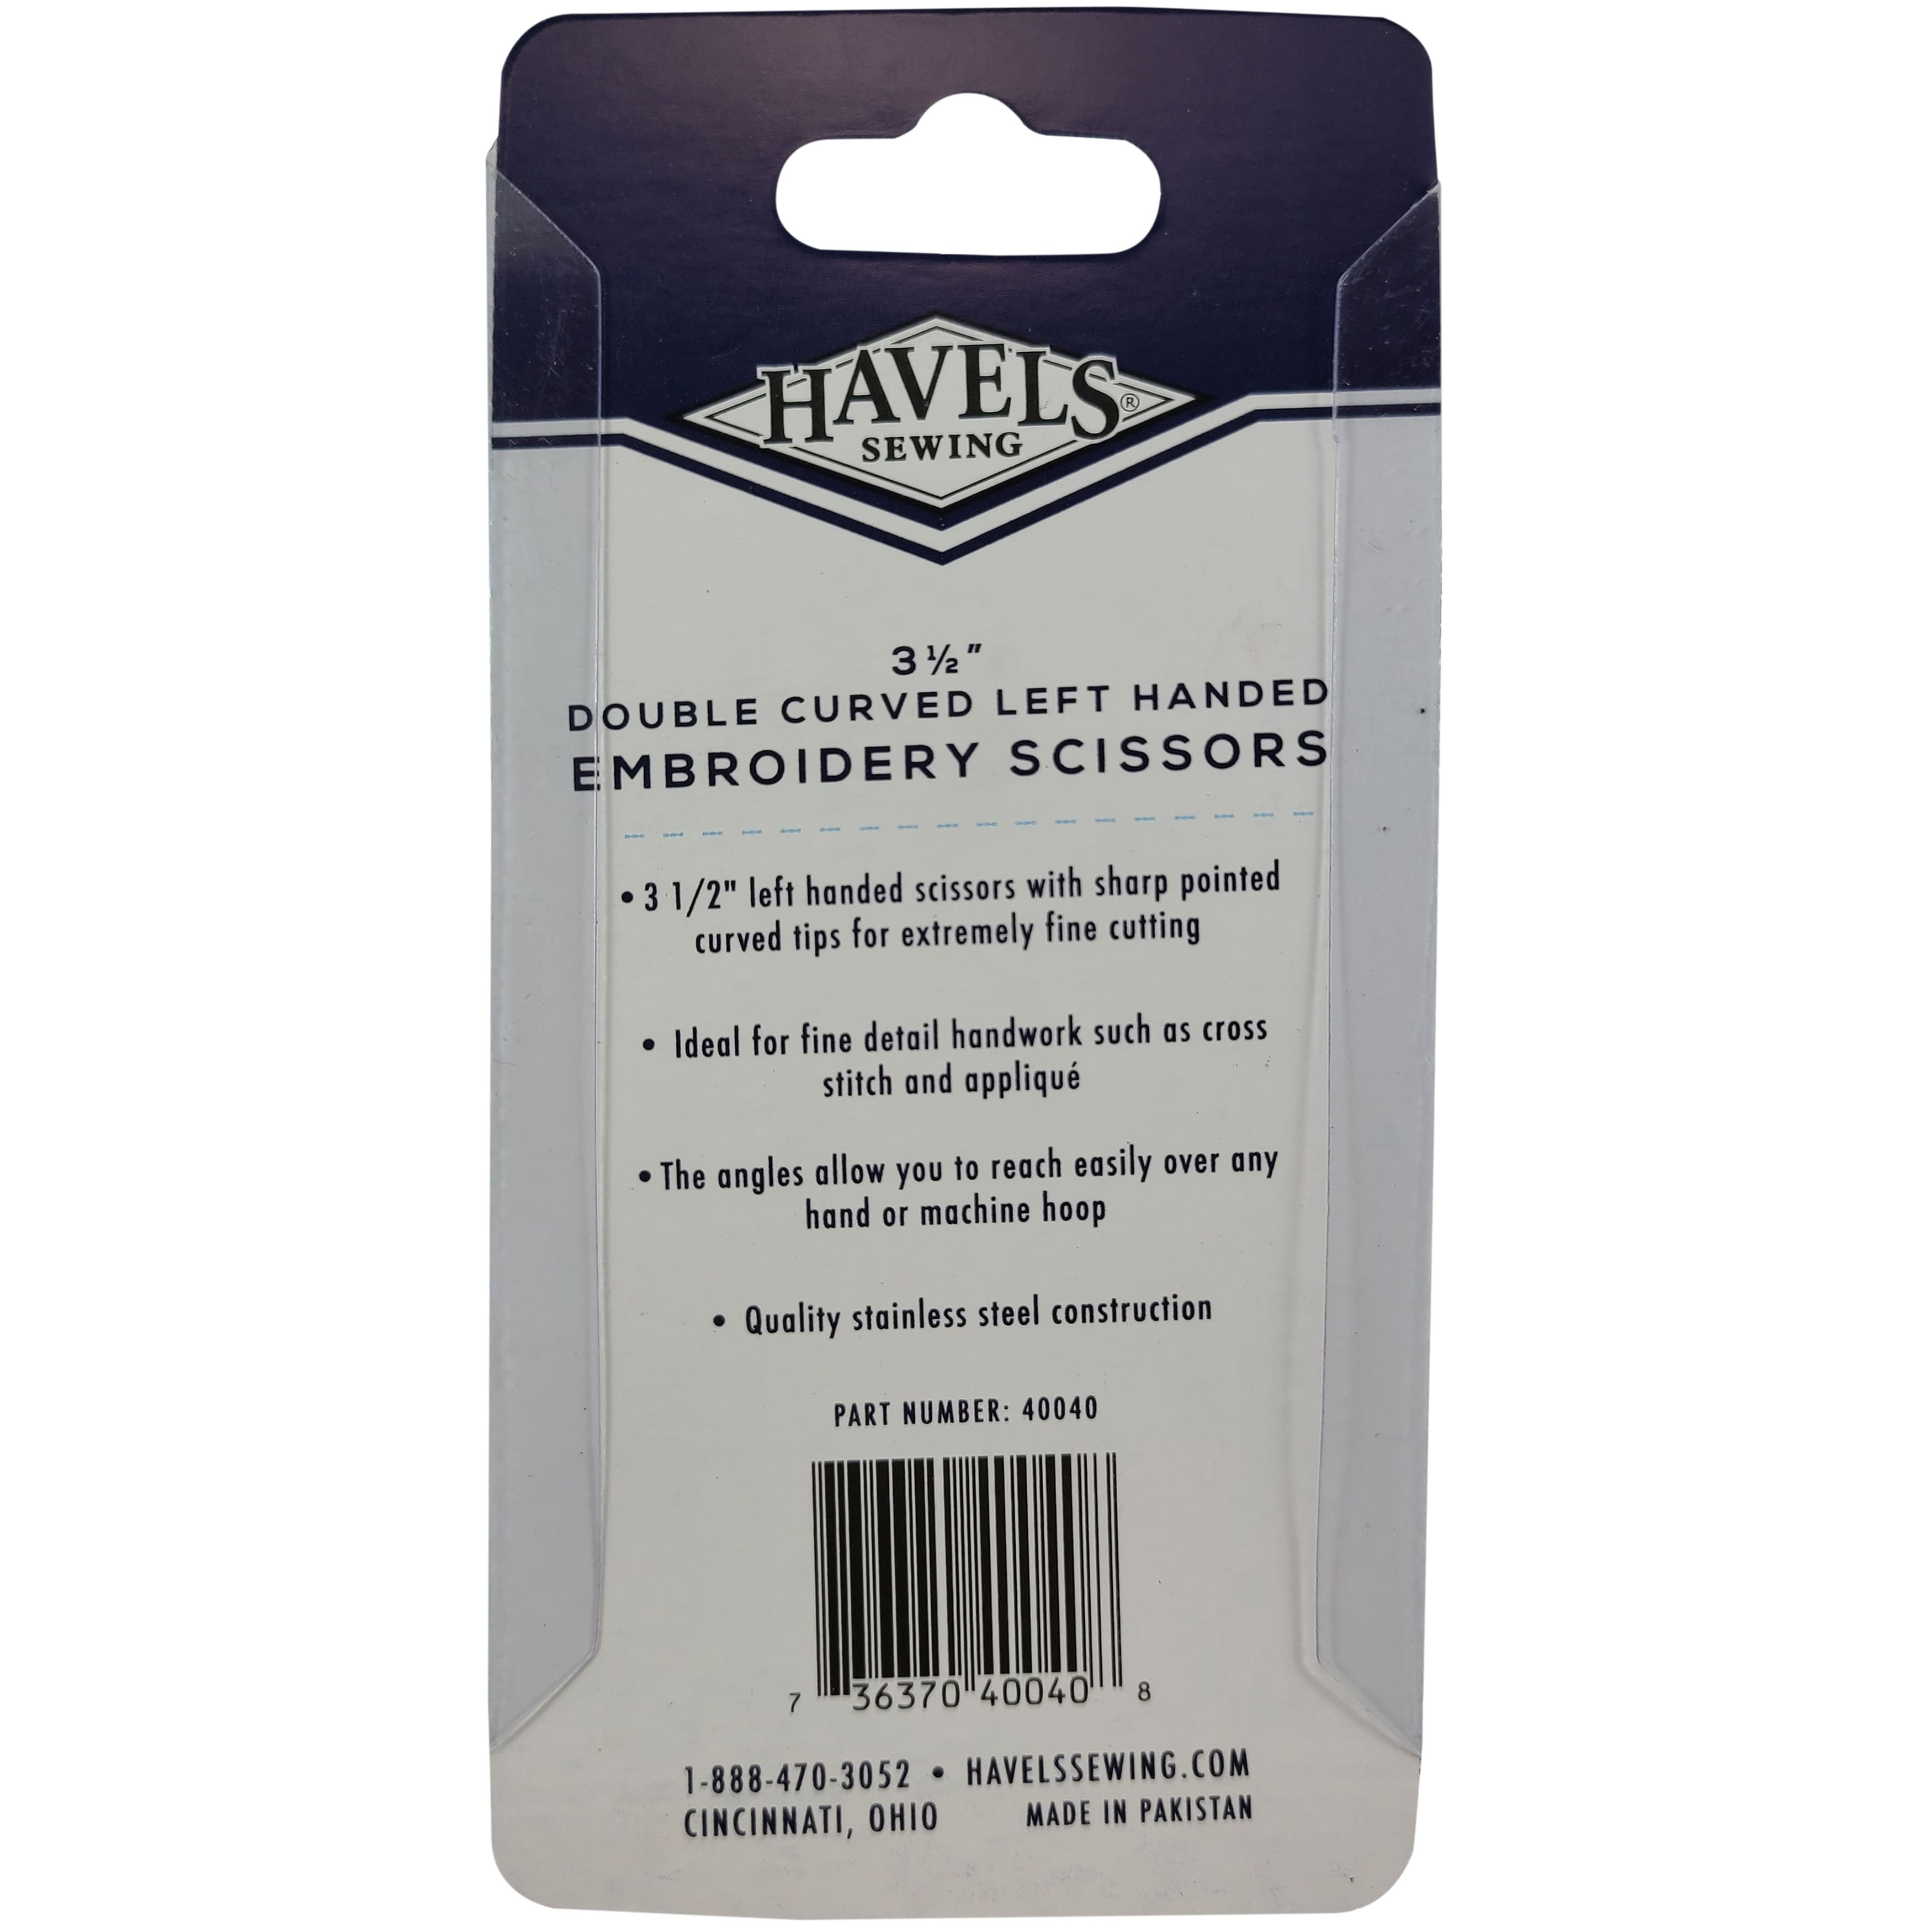 Havels Double Curved Embroidery Scissors 3.5 - Left Handed